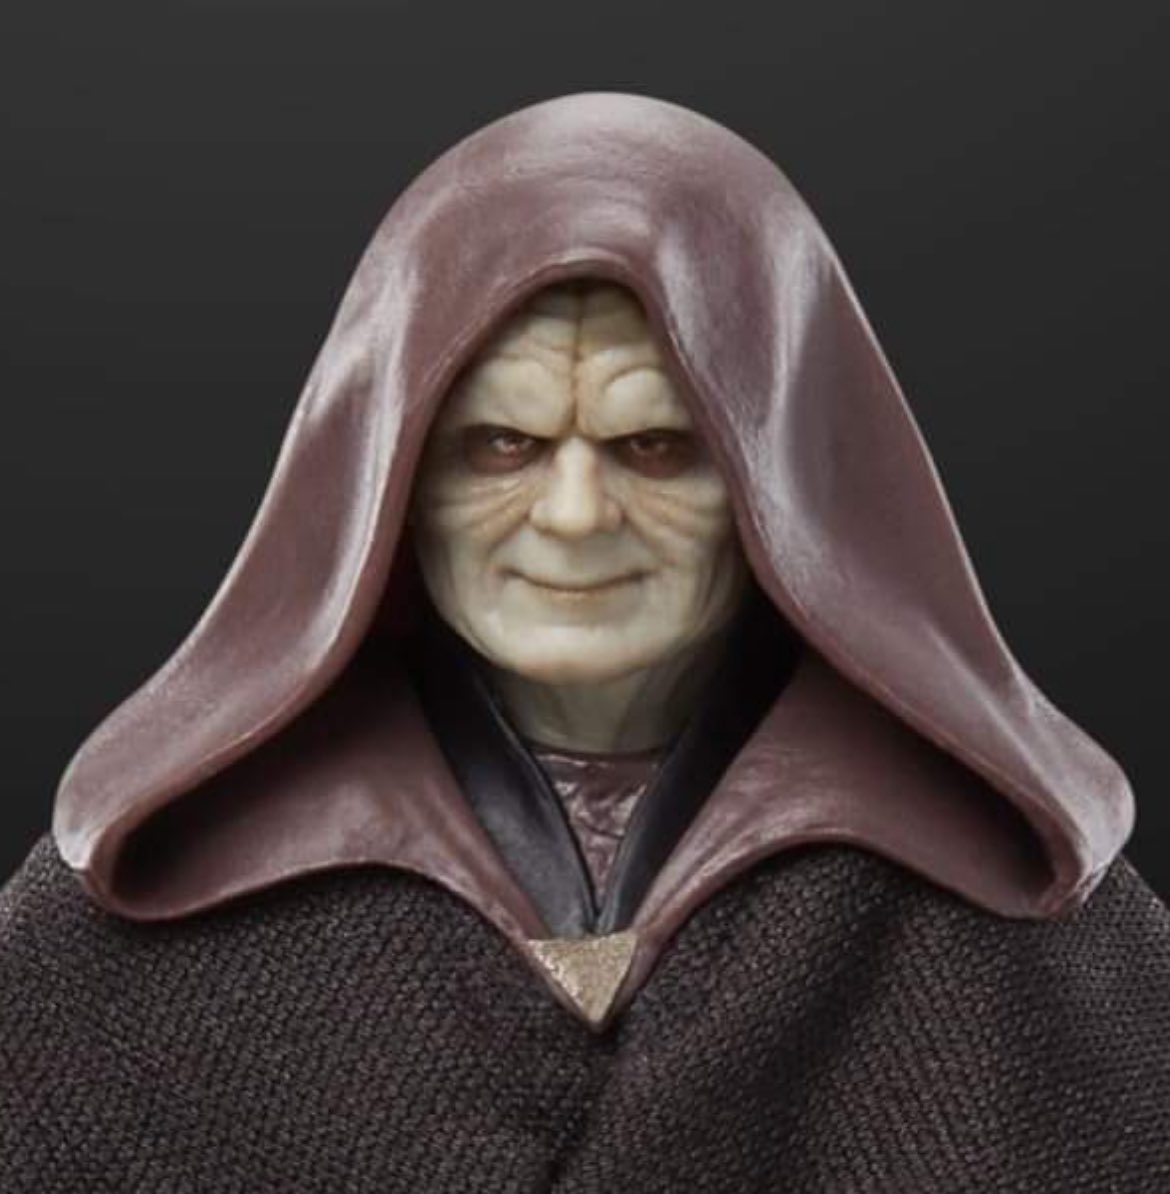 “I have waited a long time for this moment, my little green friend.” #hasbro #blackseries #starwarsblackseries #revengeofthesith #darthsidious #episodeIII #ROTS